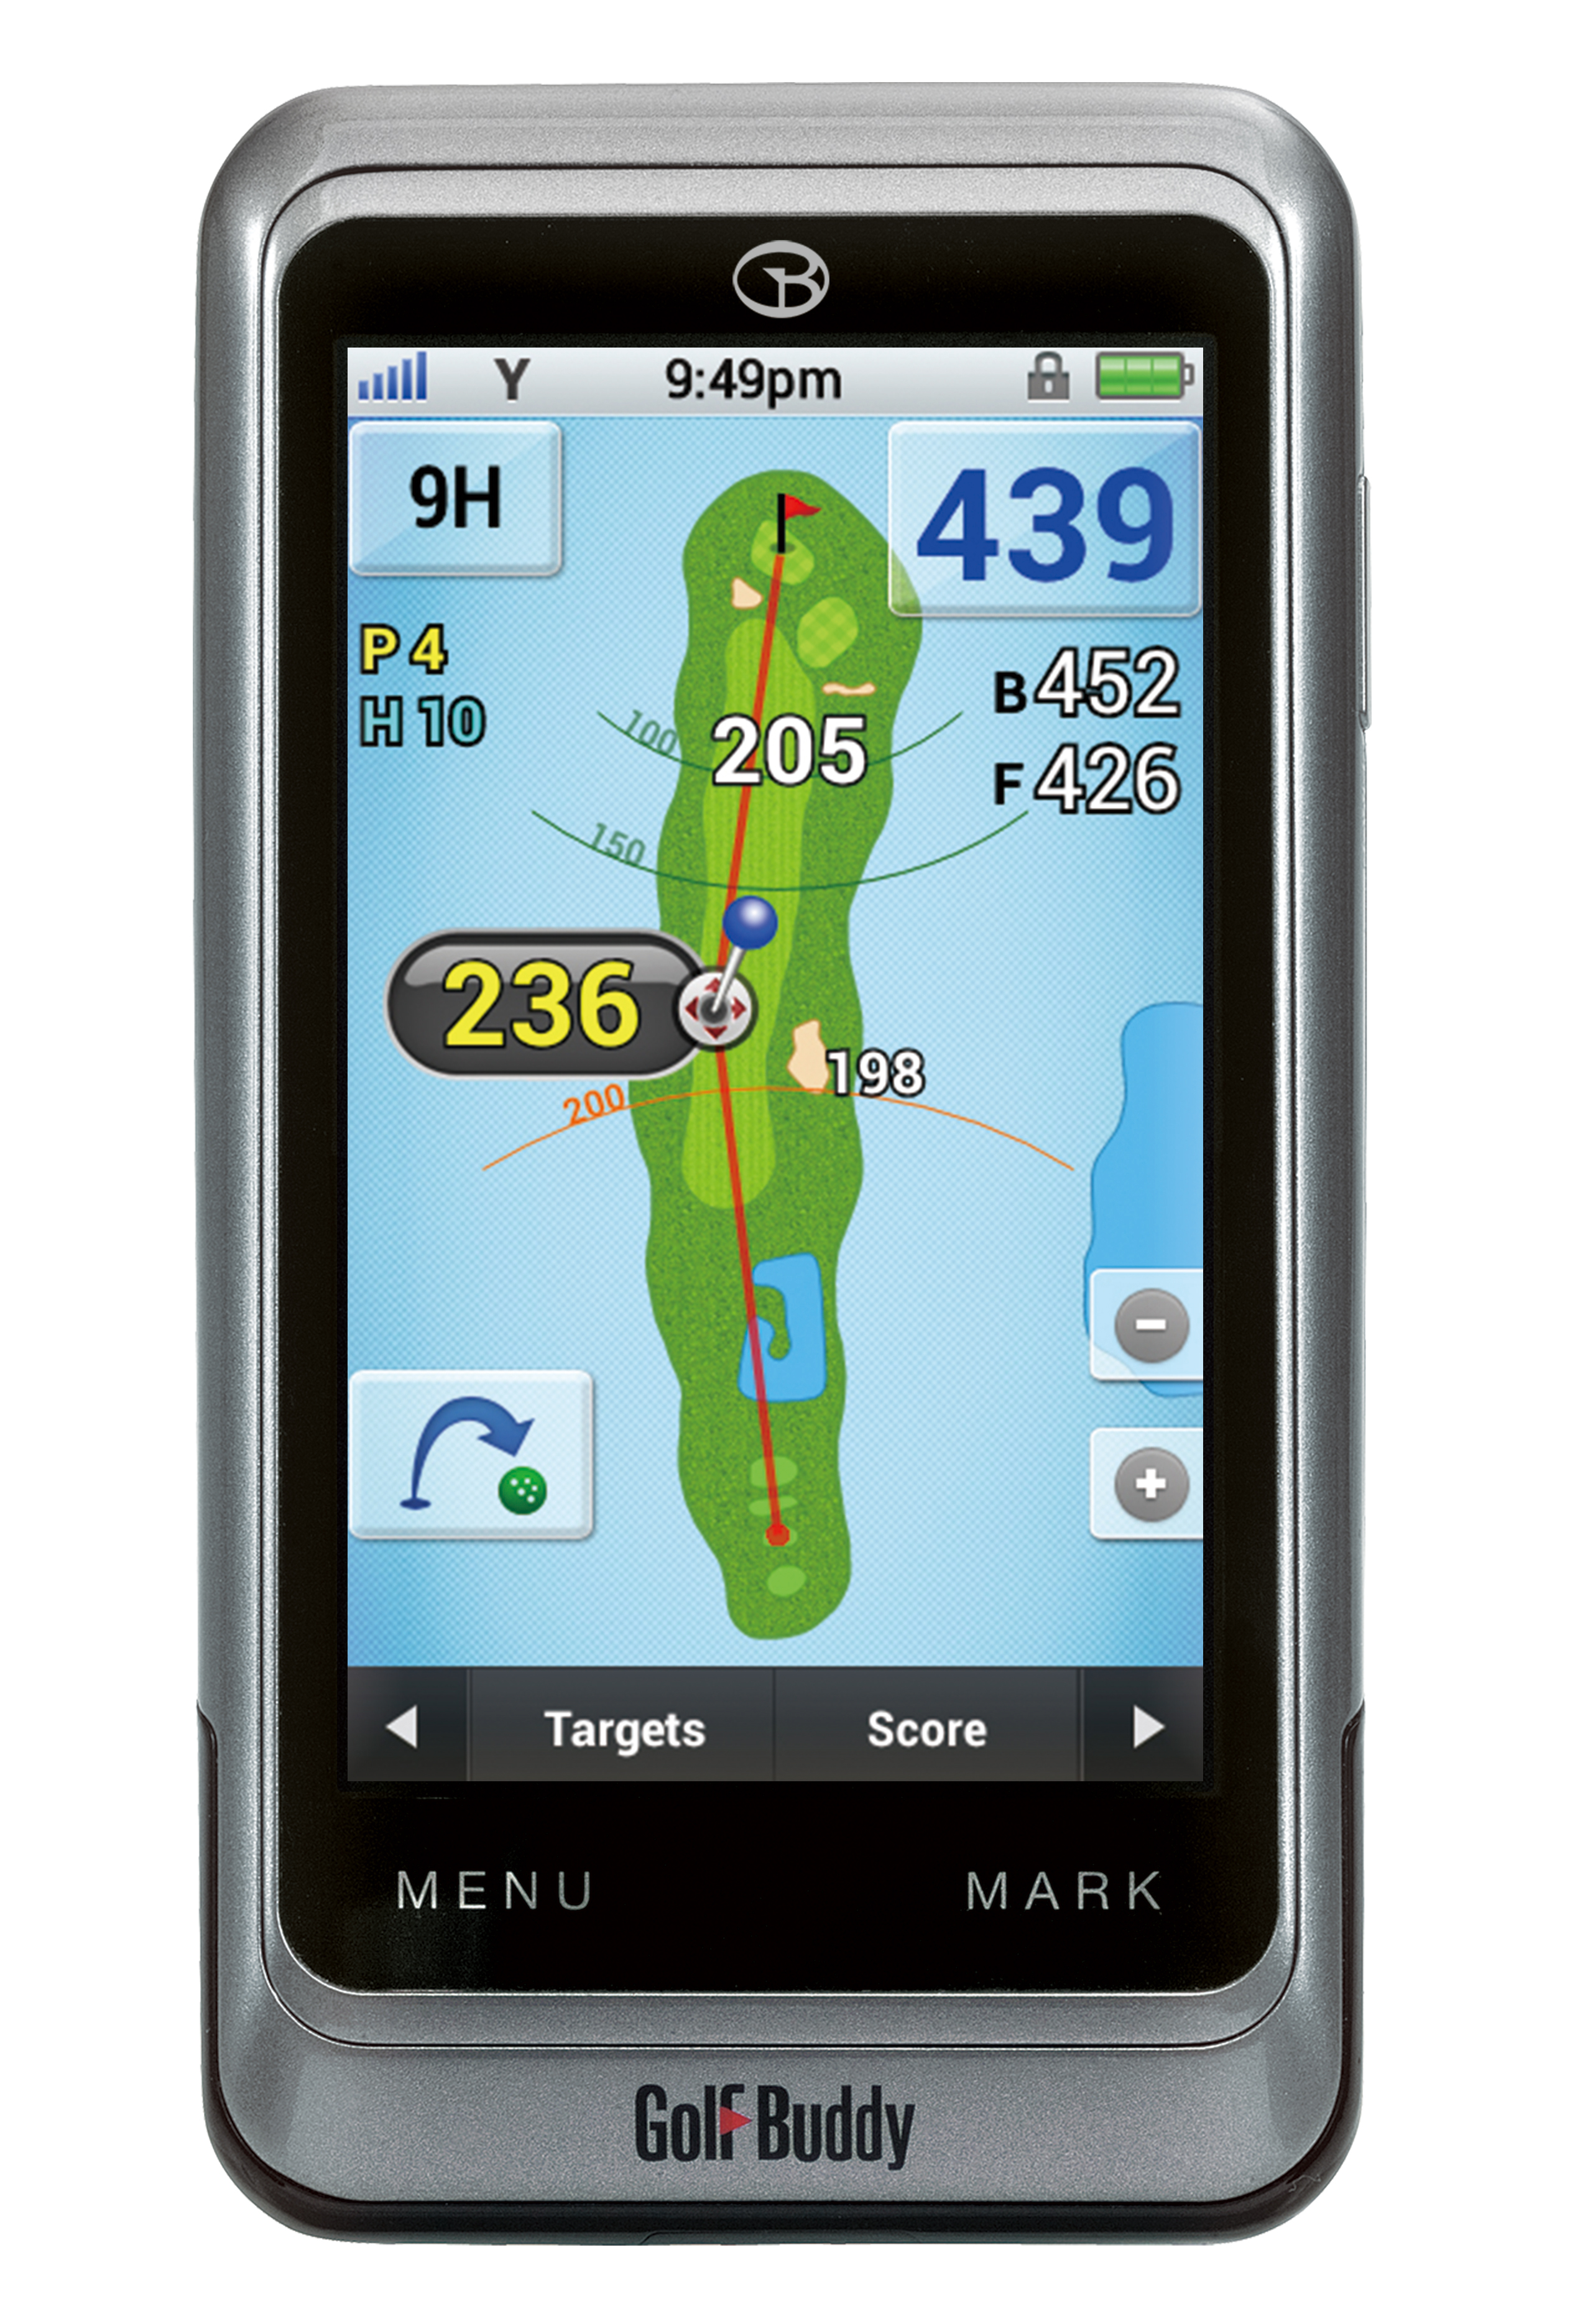 GolfBuddy PT4 features the market's only superfast 4" touchscreen handheld device